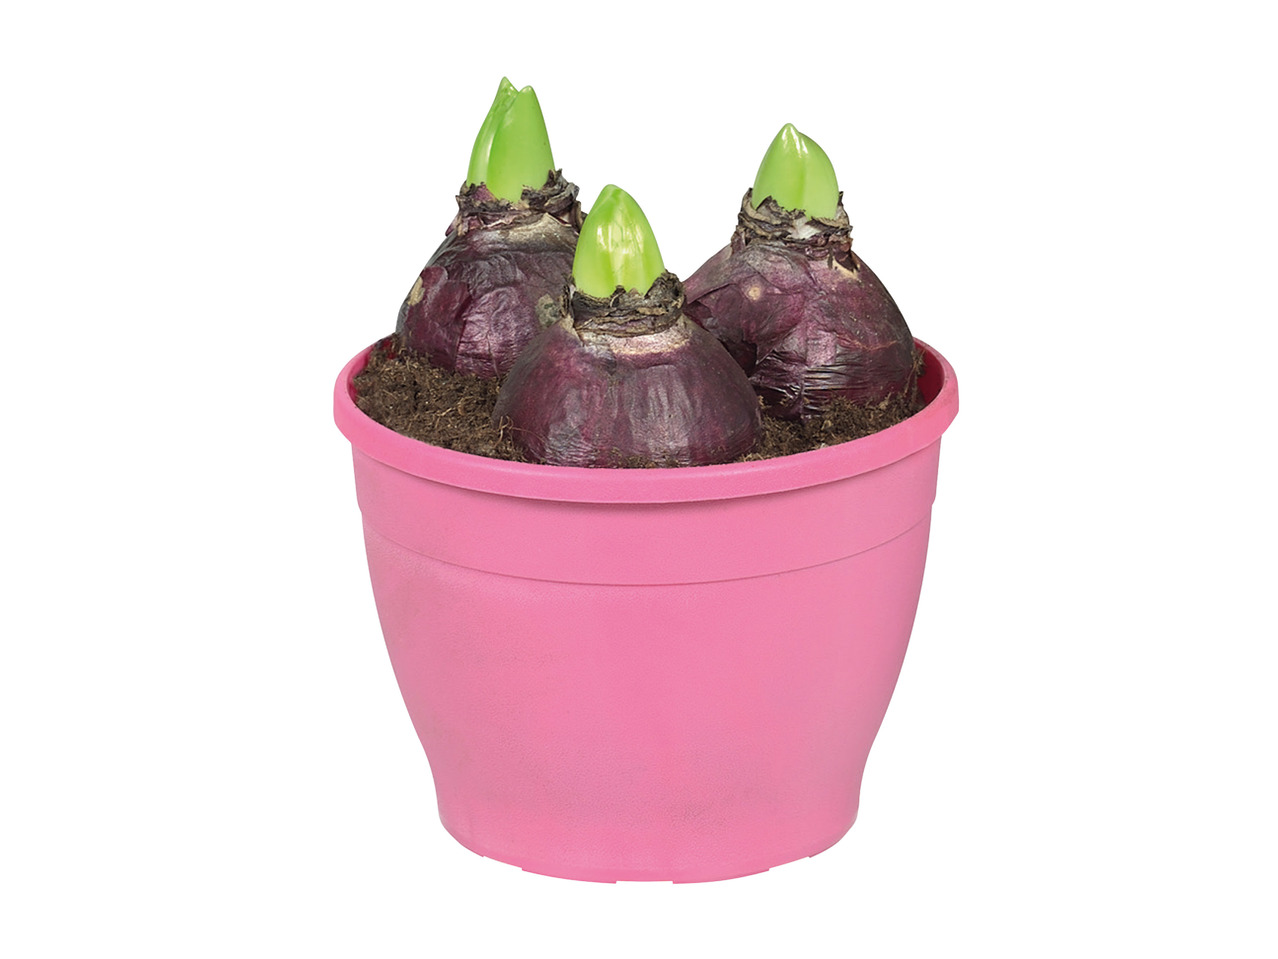 Potted Hyacinth Bulbs in Colourful Pot1